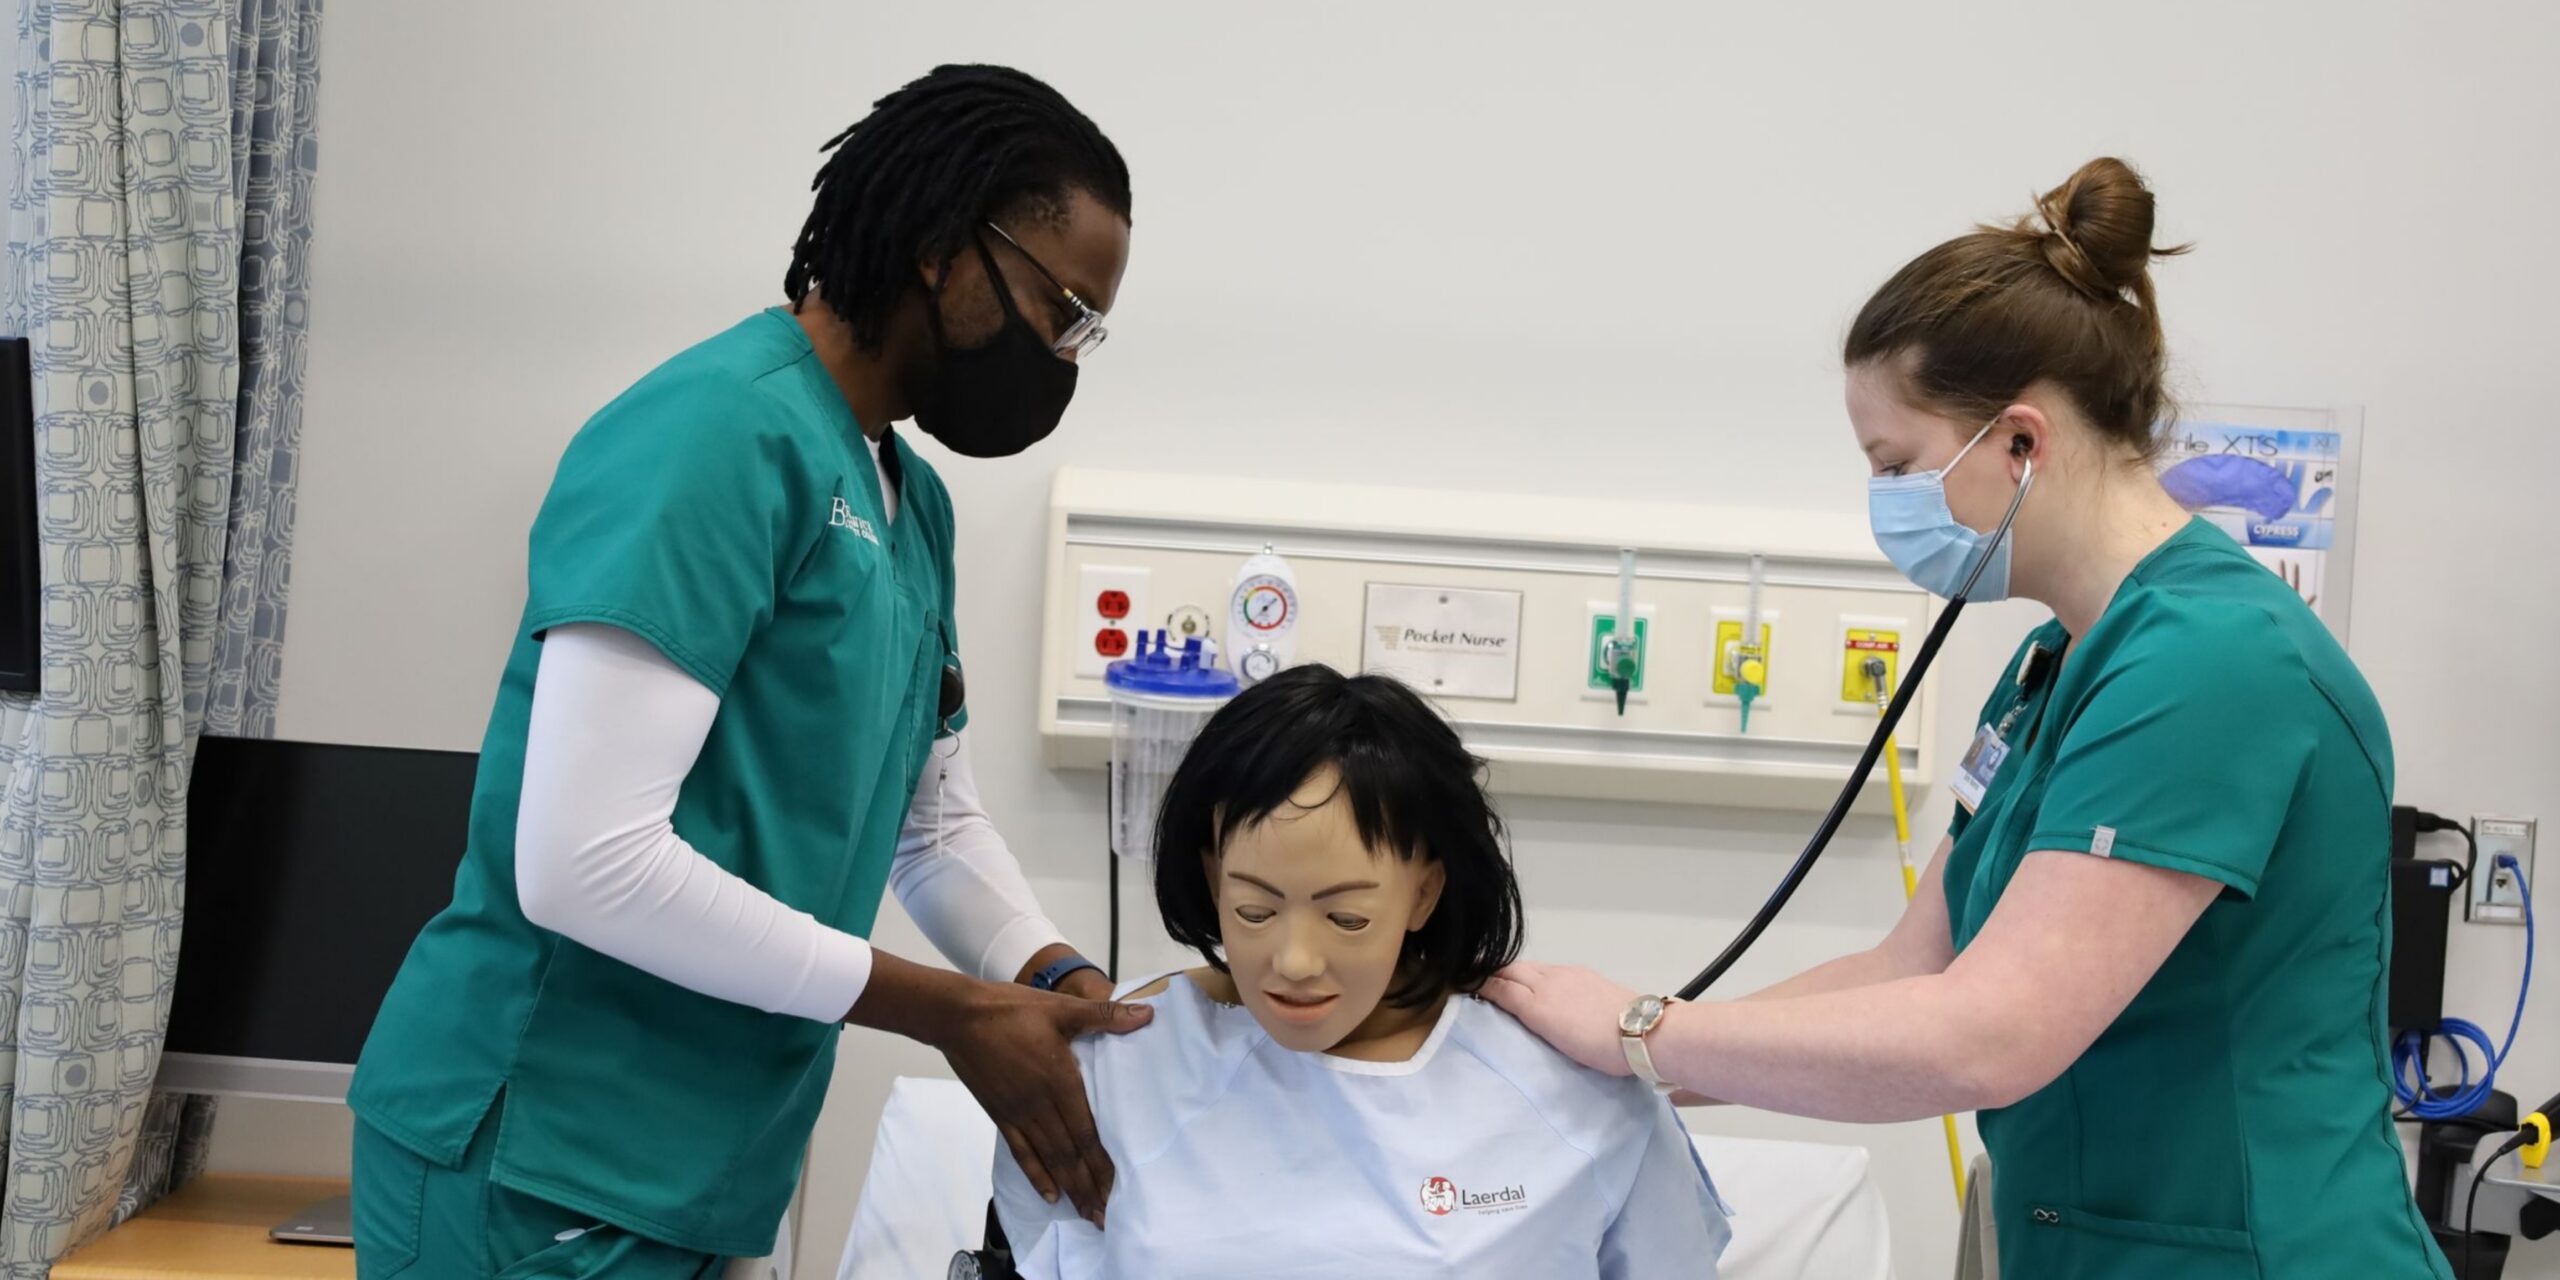 TWO NURSING STUDENTS WITH SIM DOLL